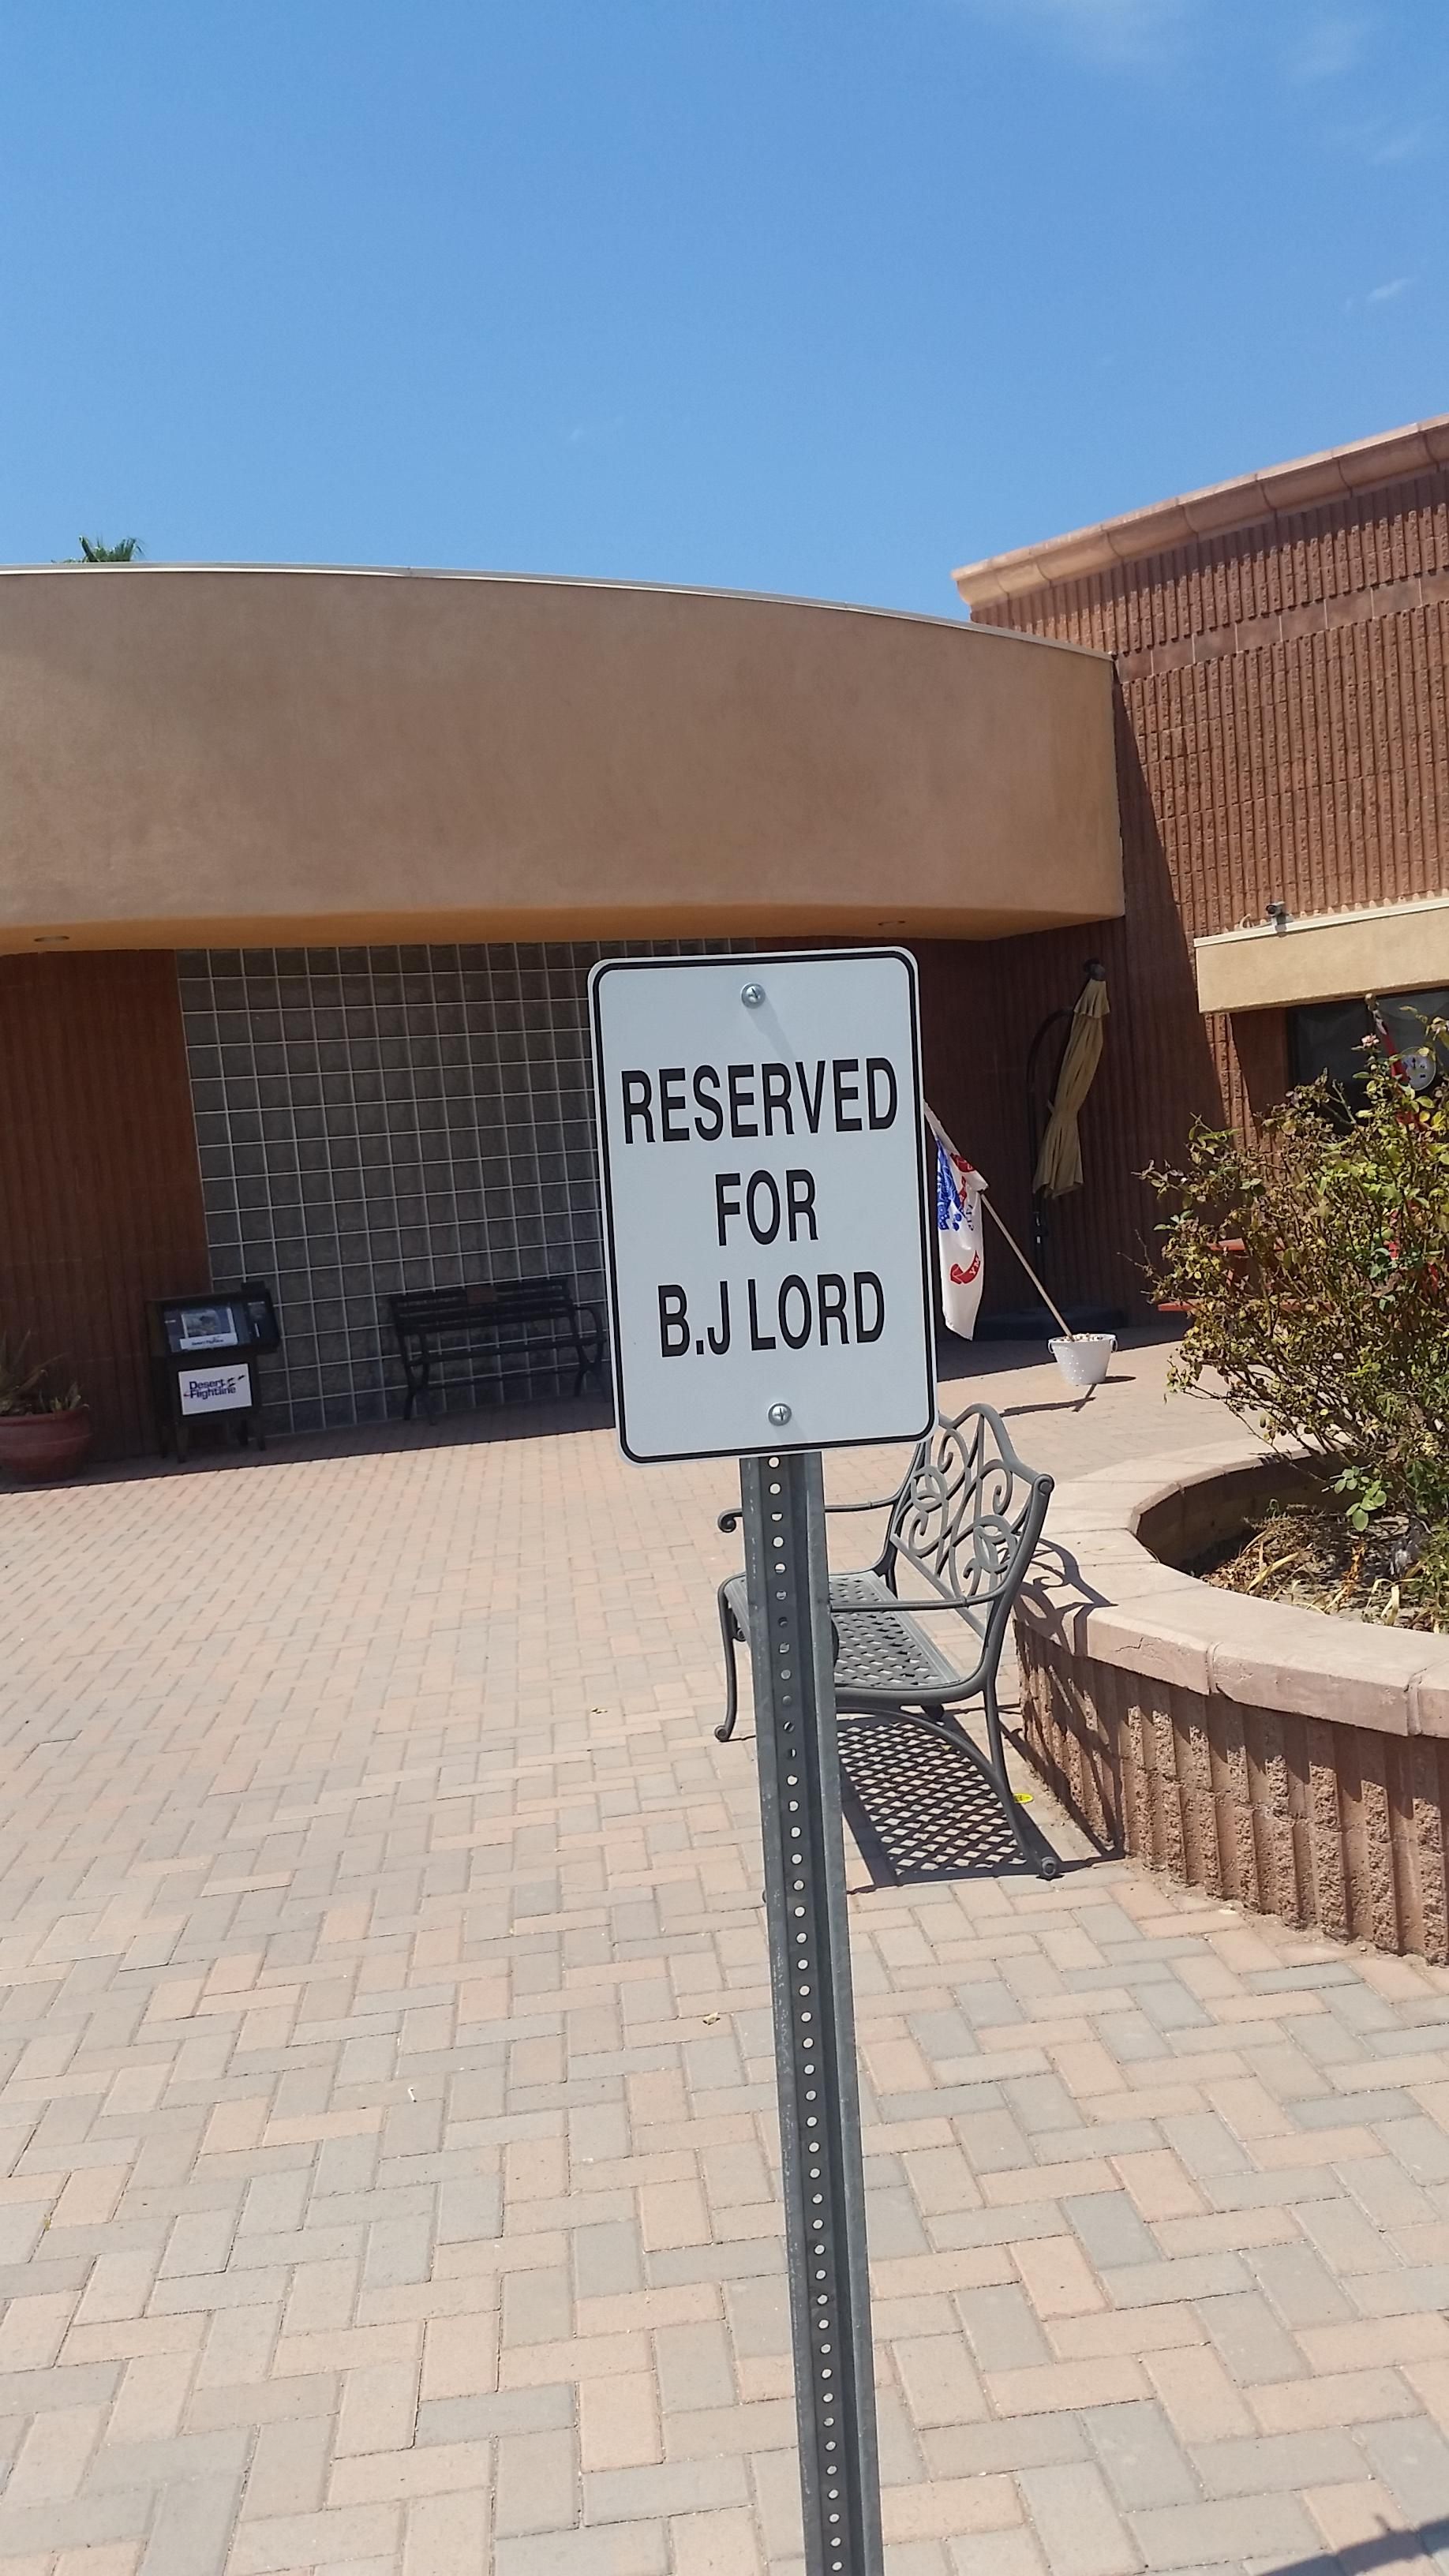 Looks like I found your mom's parking spot.